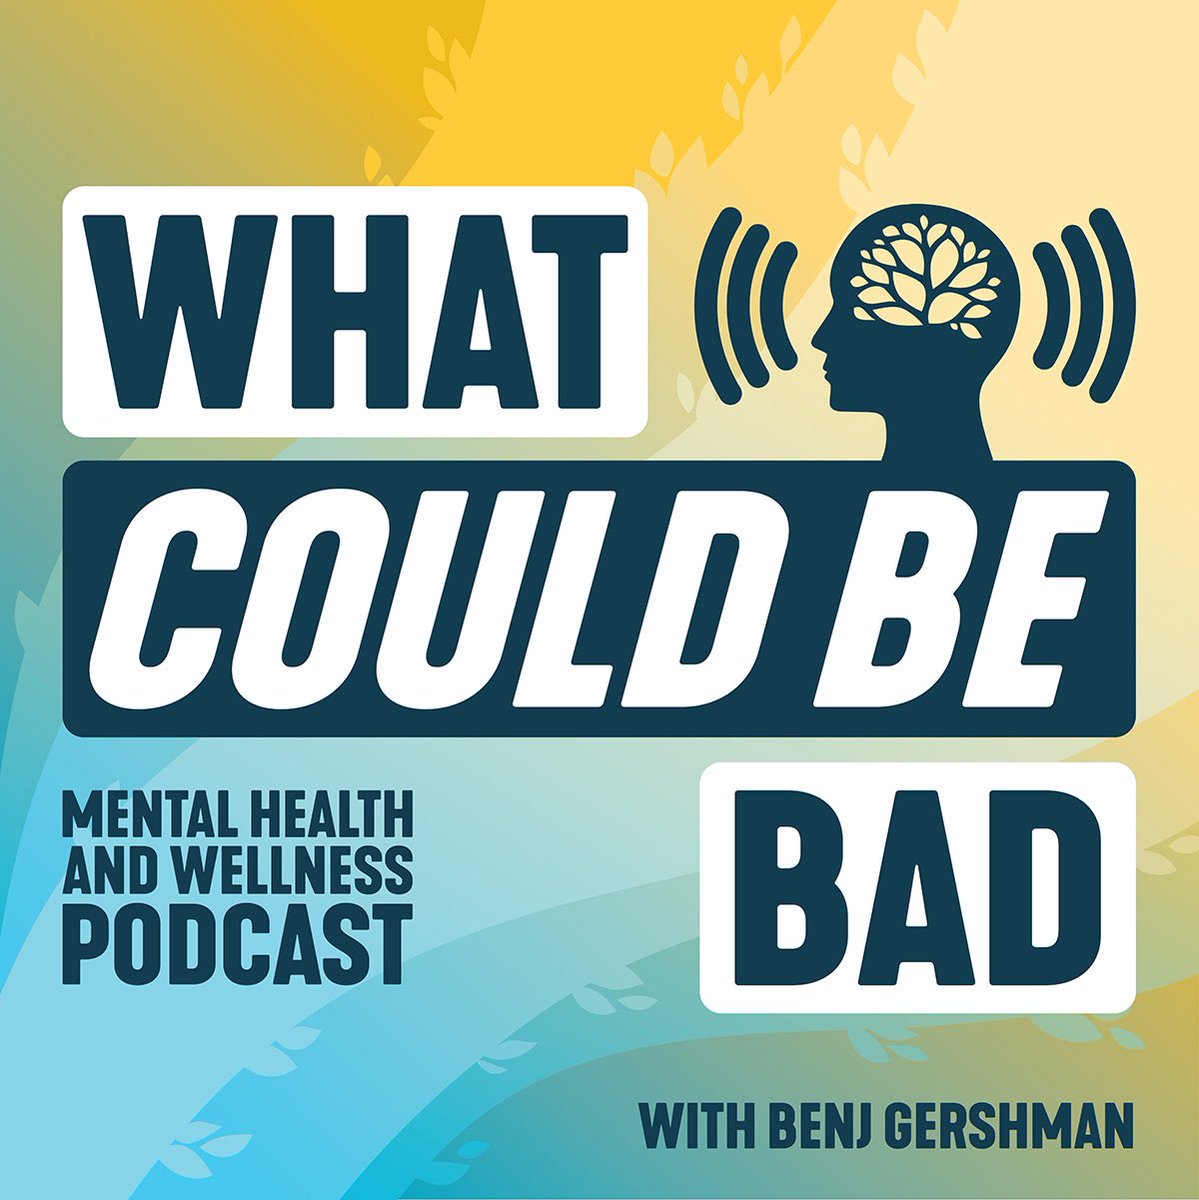 In celebration of #MentalHealthAwarenessMonth, @benjgershman will debut his NEW podcast, #WhatCouldBeBad, on Wednesday, May 1st!🗓️

Join Benj and his music industry guests in a conversation that elevates and destigmatizes mental health. 

Streaming everywhere May 1st!

Learn more…